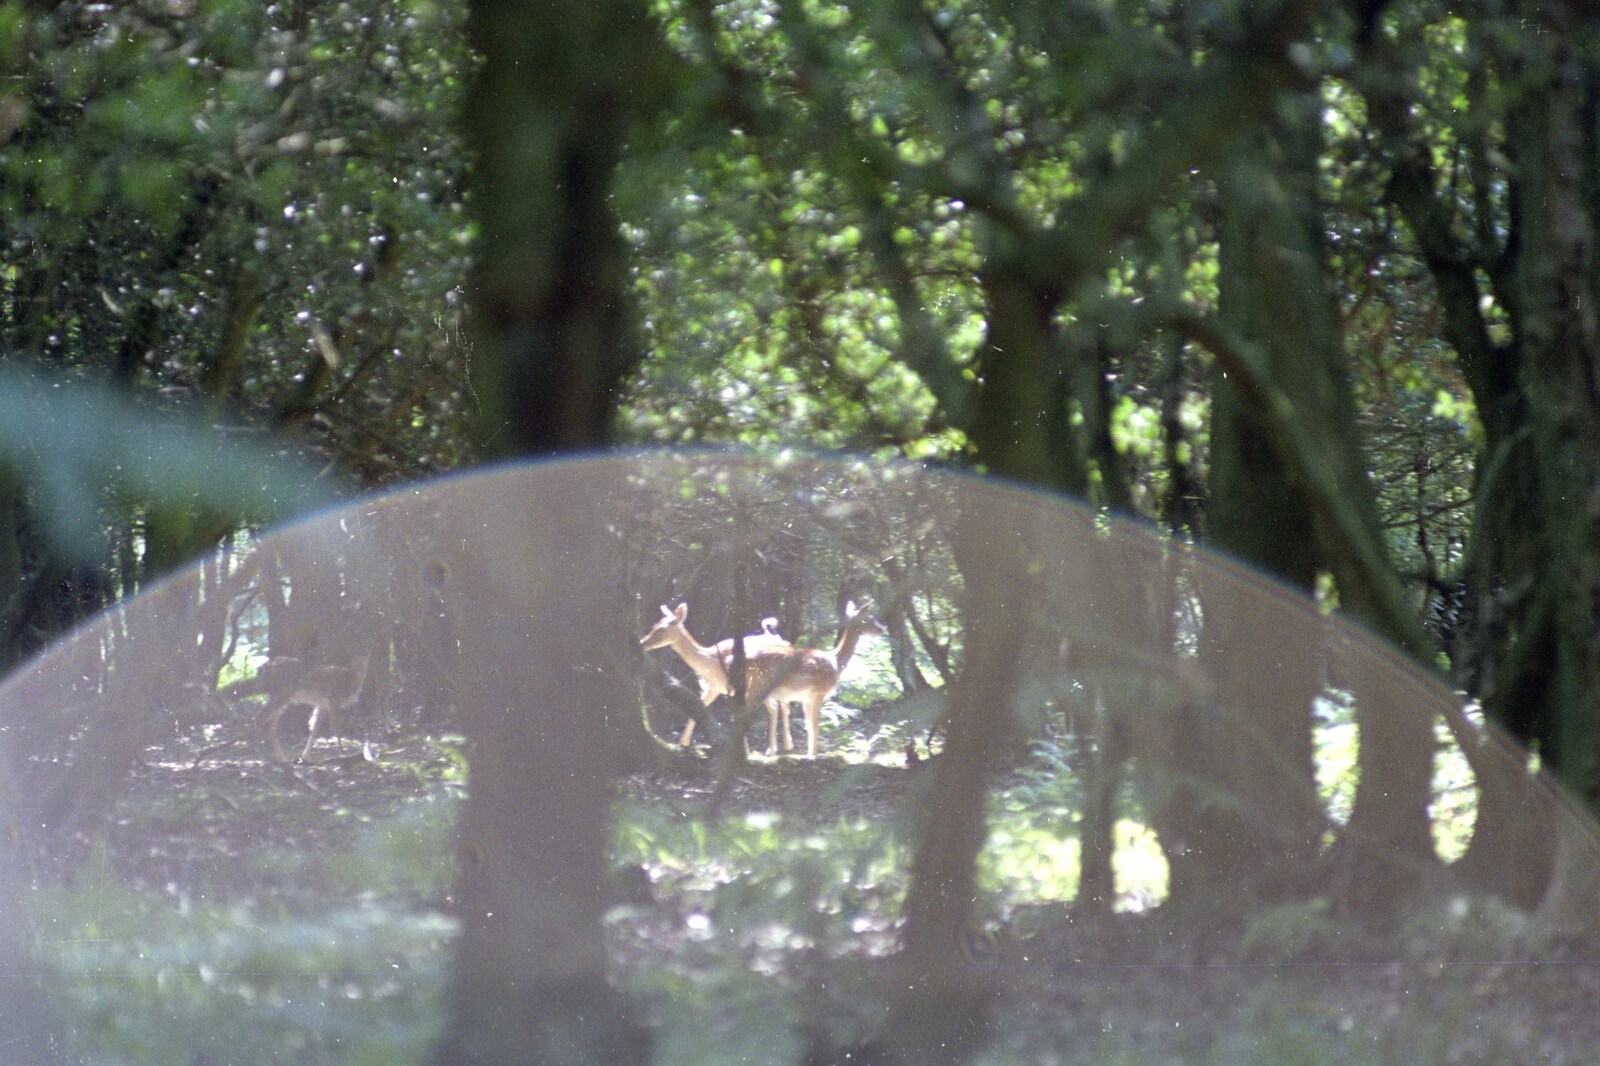 Some deer in the New Forest from A Walk in the New Forest, Hampshire - 27th July 1989